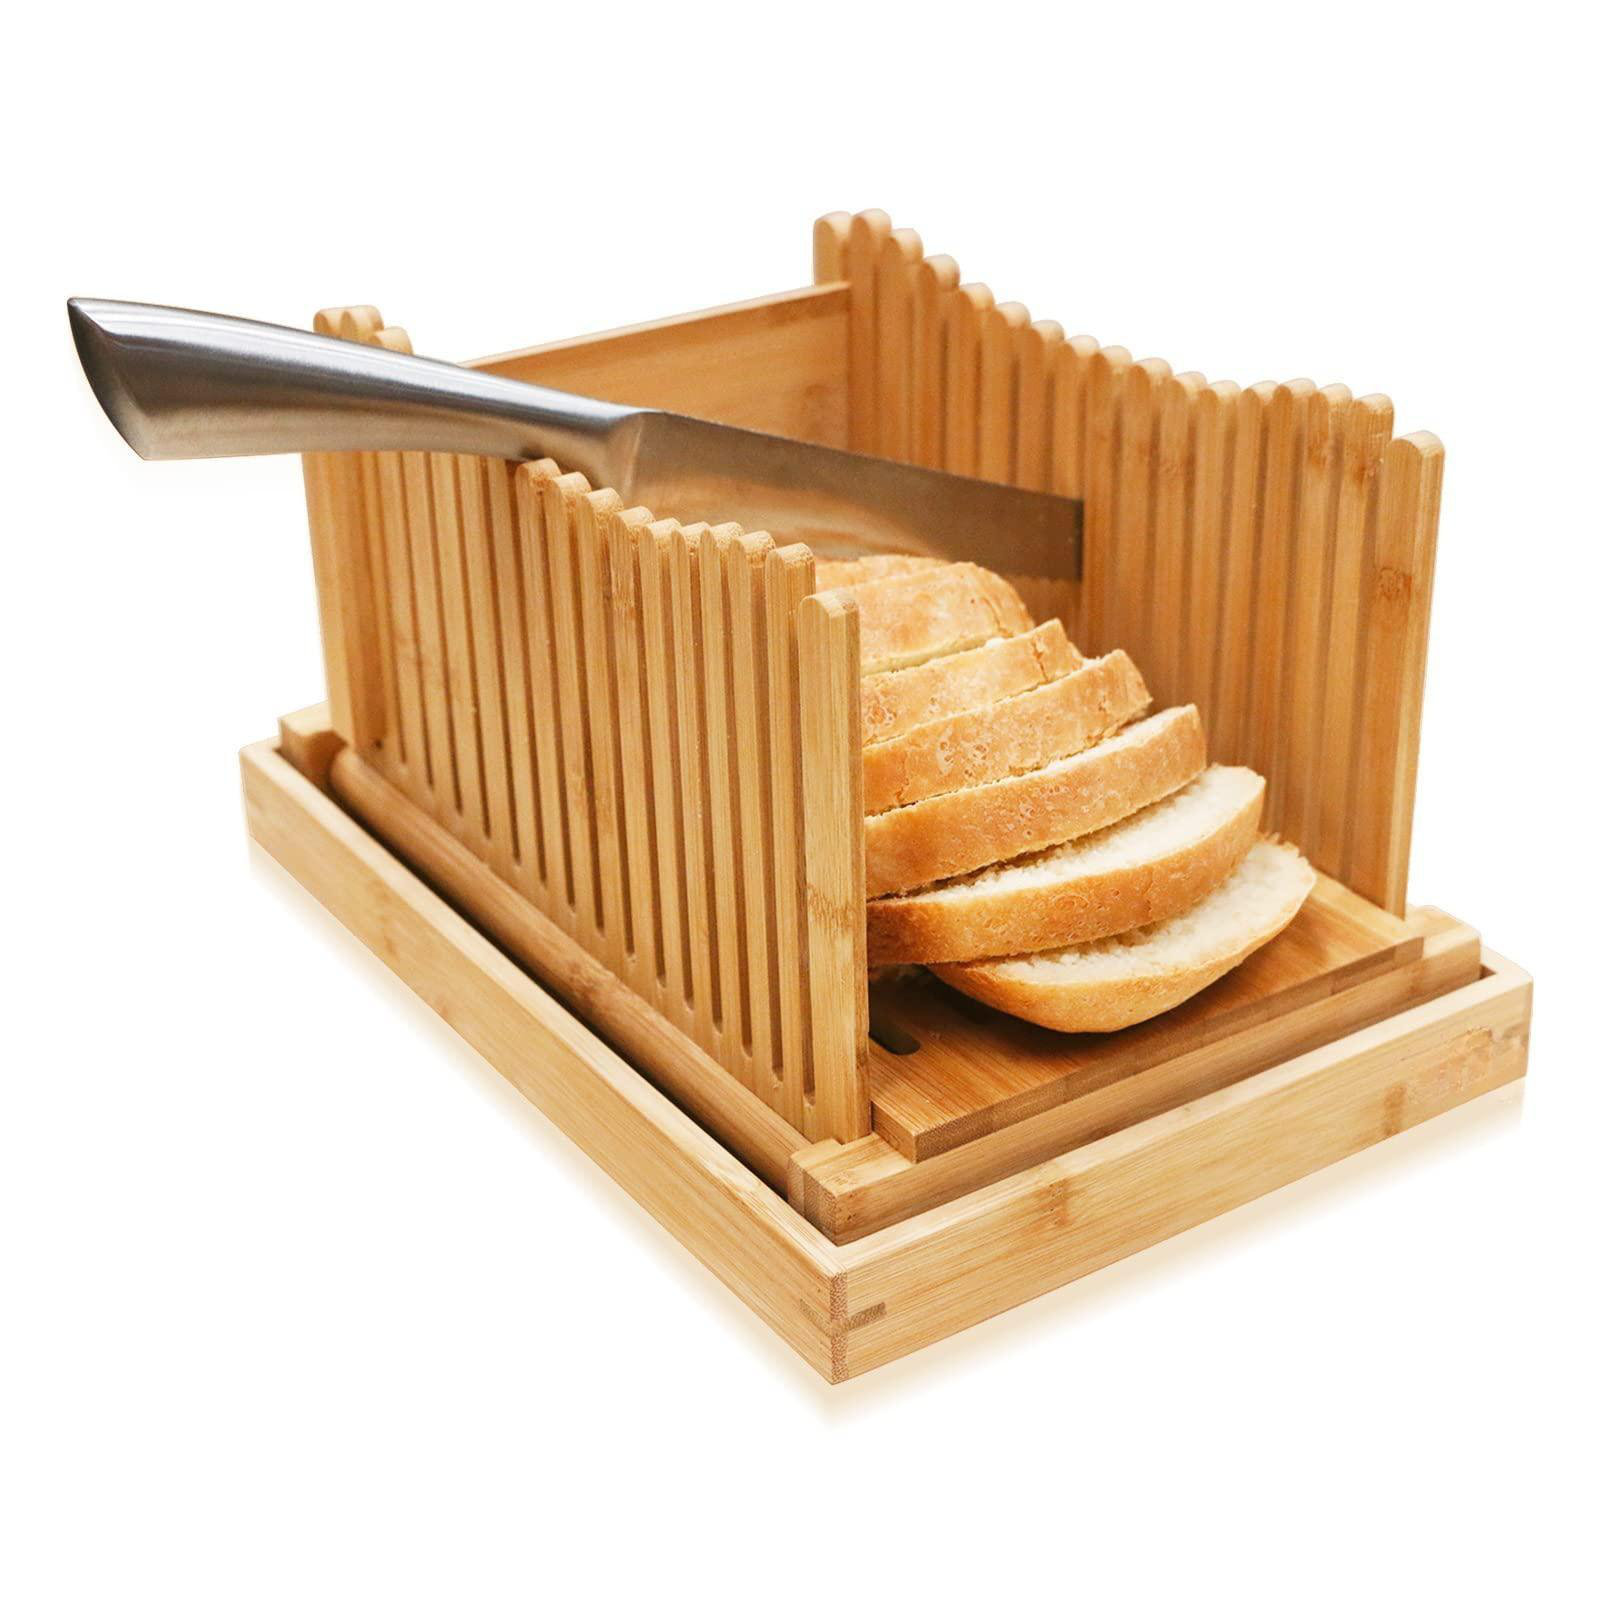 A Home Bread Knife 14.5 Inch & Bread Slicer, Compact Bread Cutting